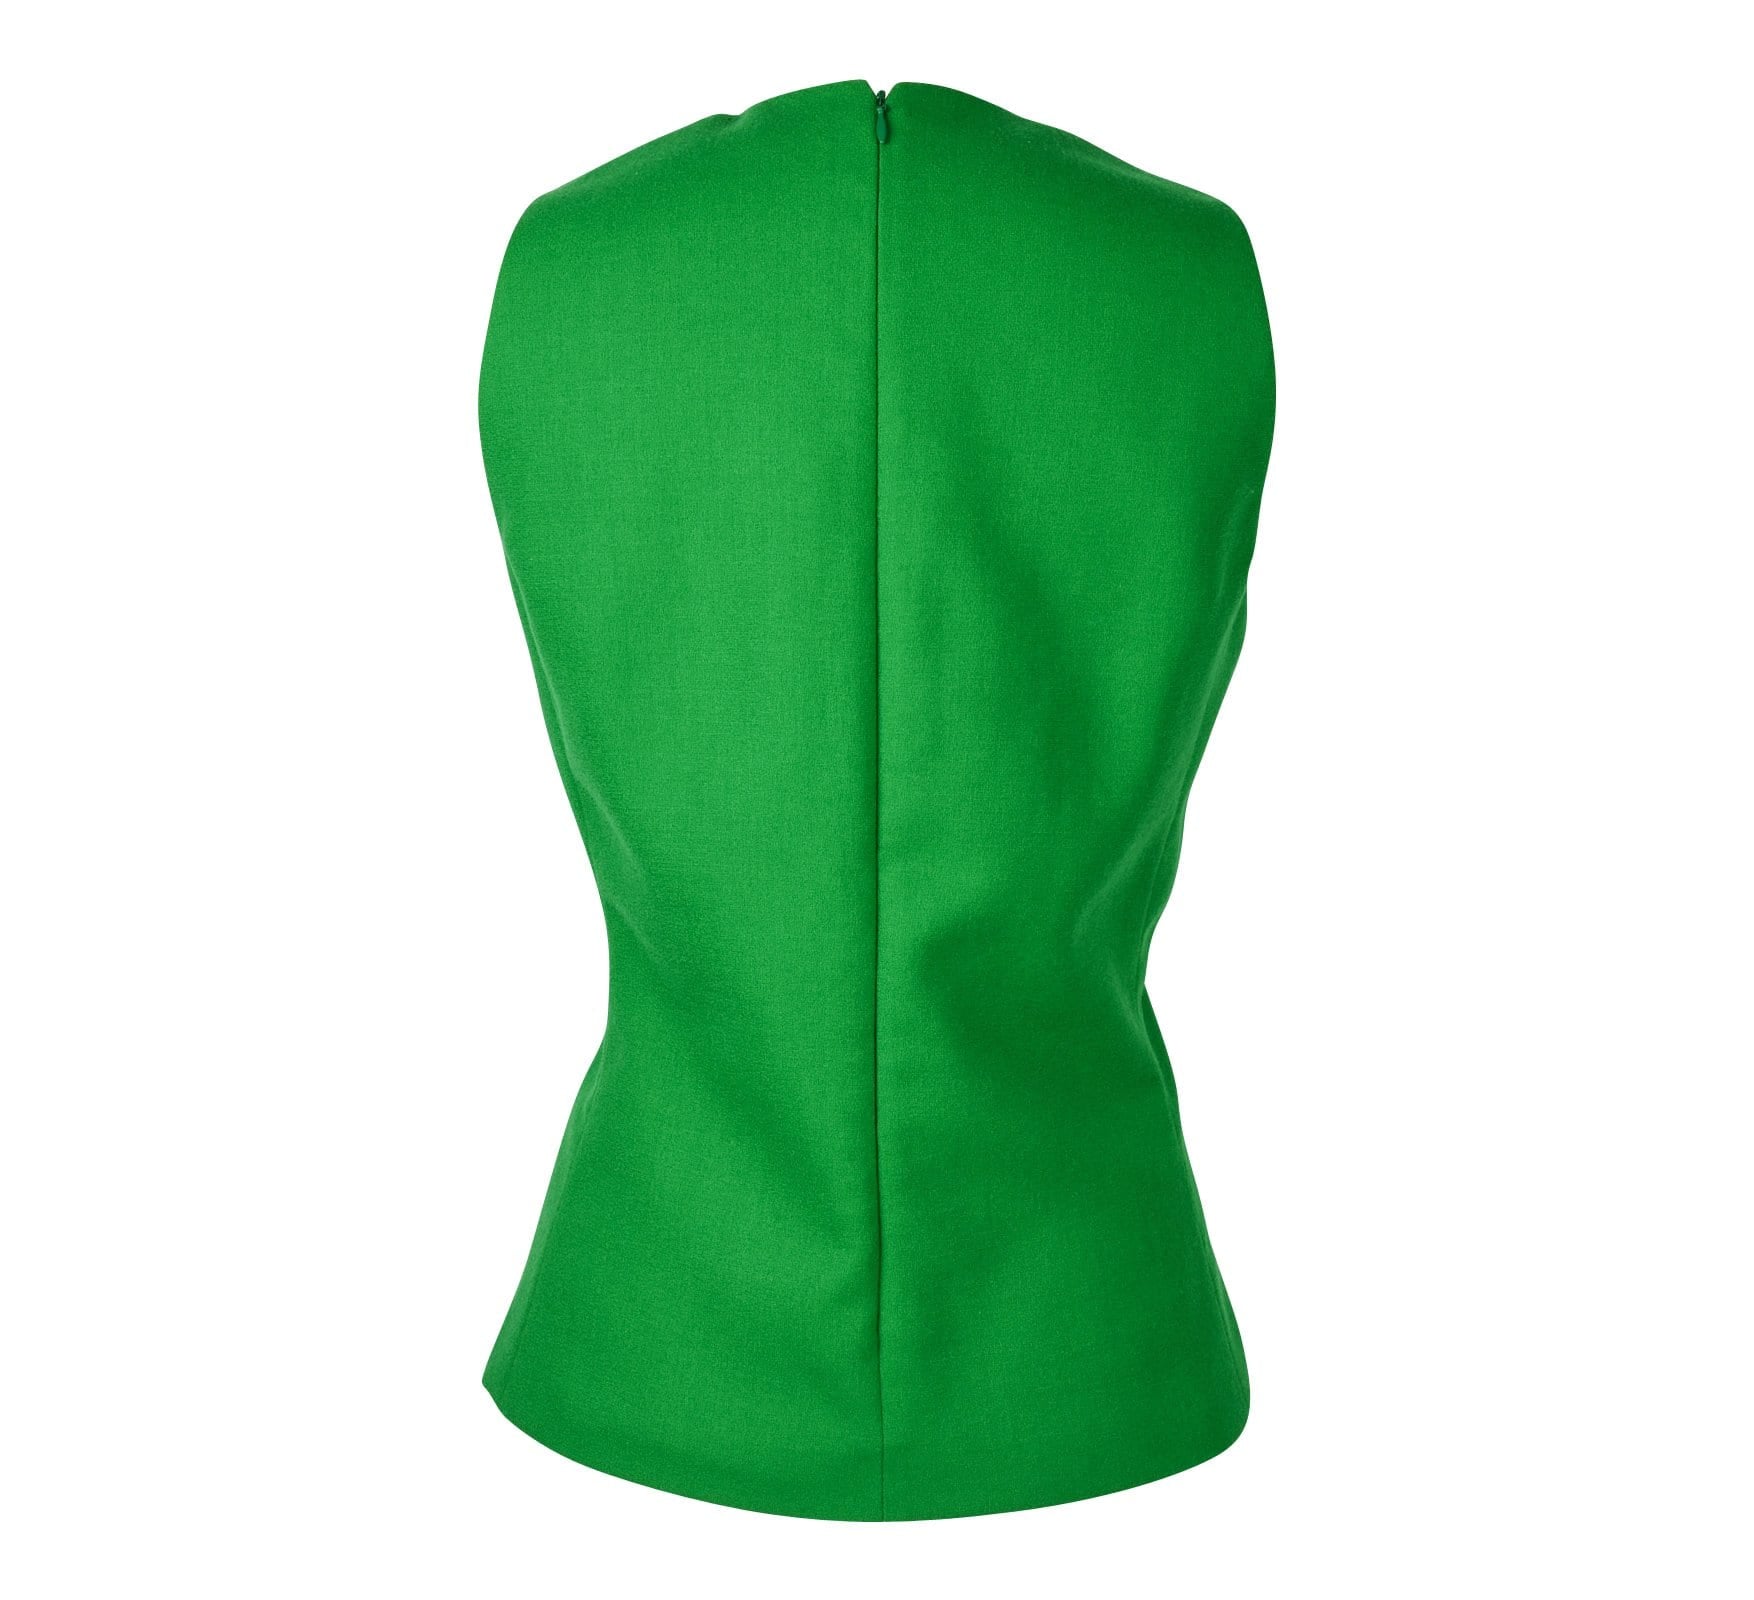 Christian Dior Top Emerald Green Sleeveless Shaped and Fitted fits 8 - mightychic